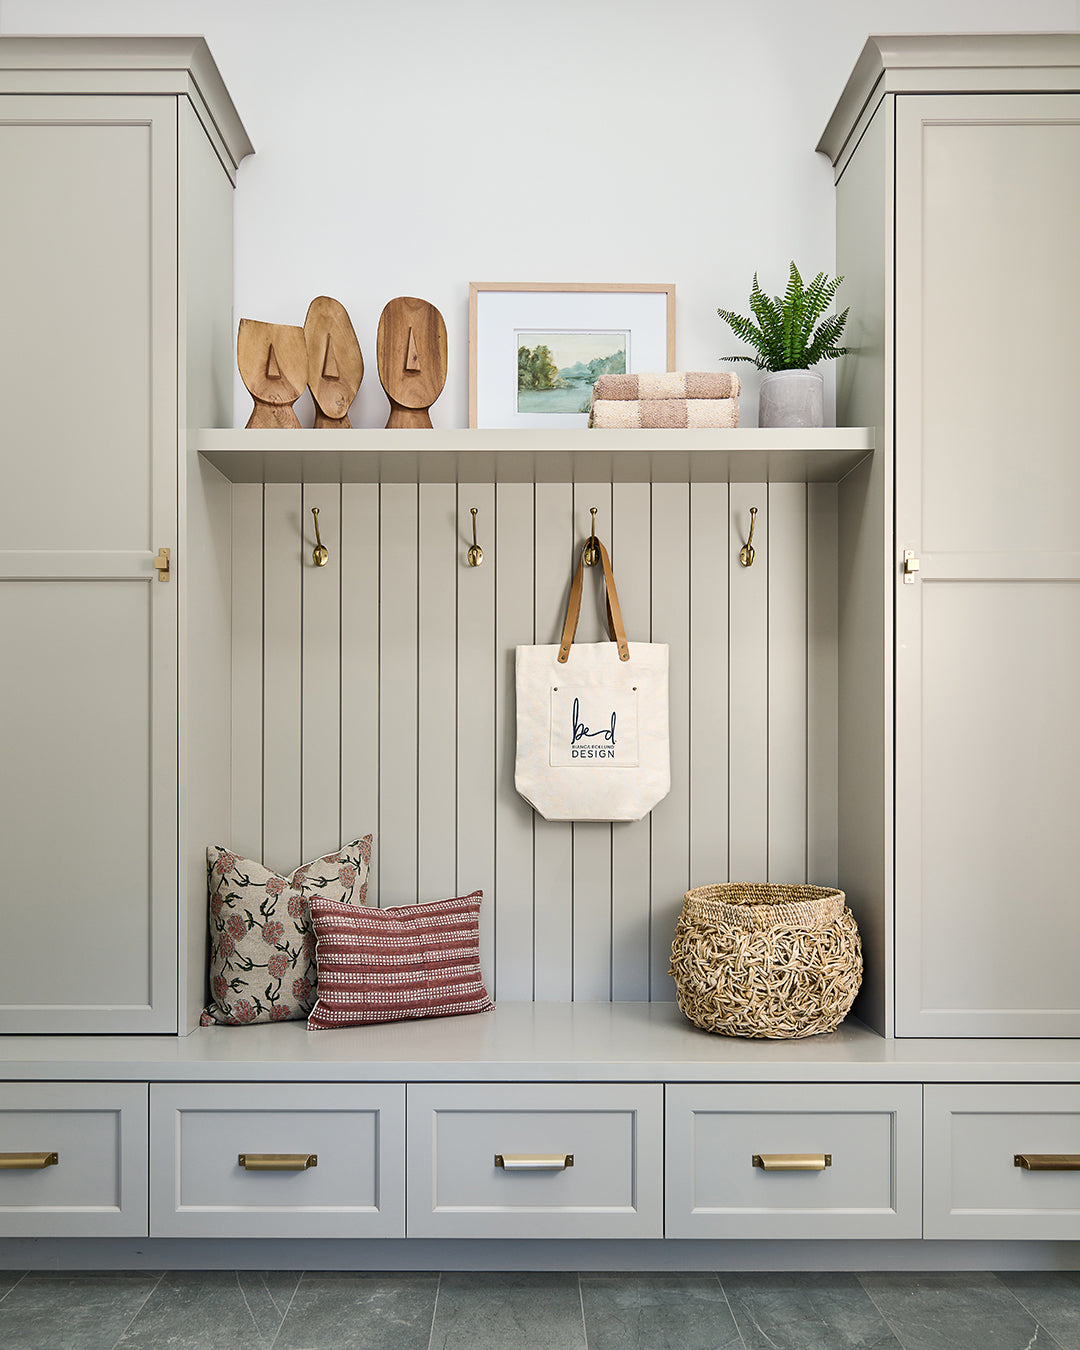 Cream mudroom cabinetry with stylish decor like a set of 3 wooden face sculpturess